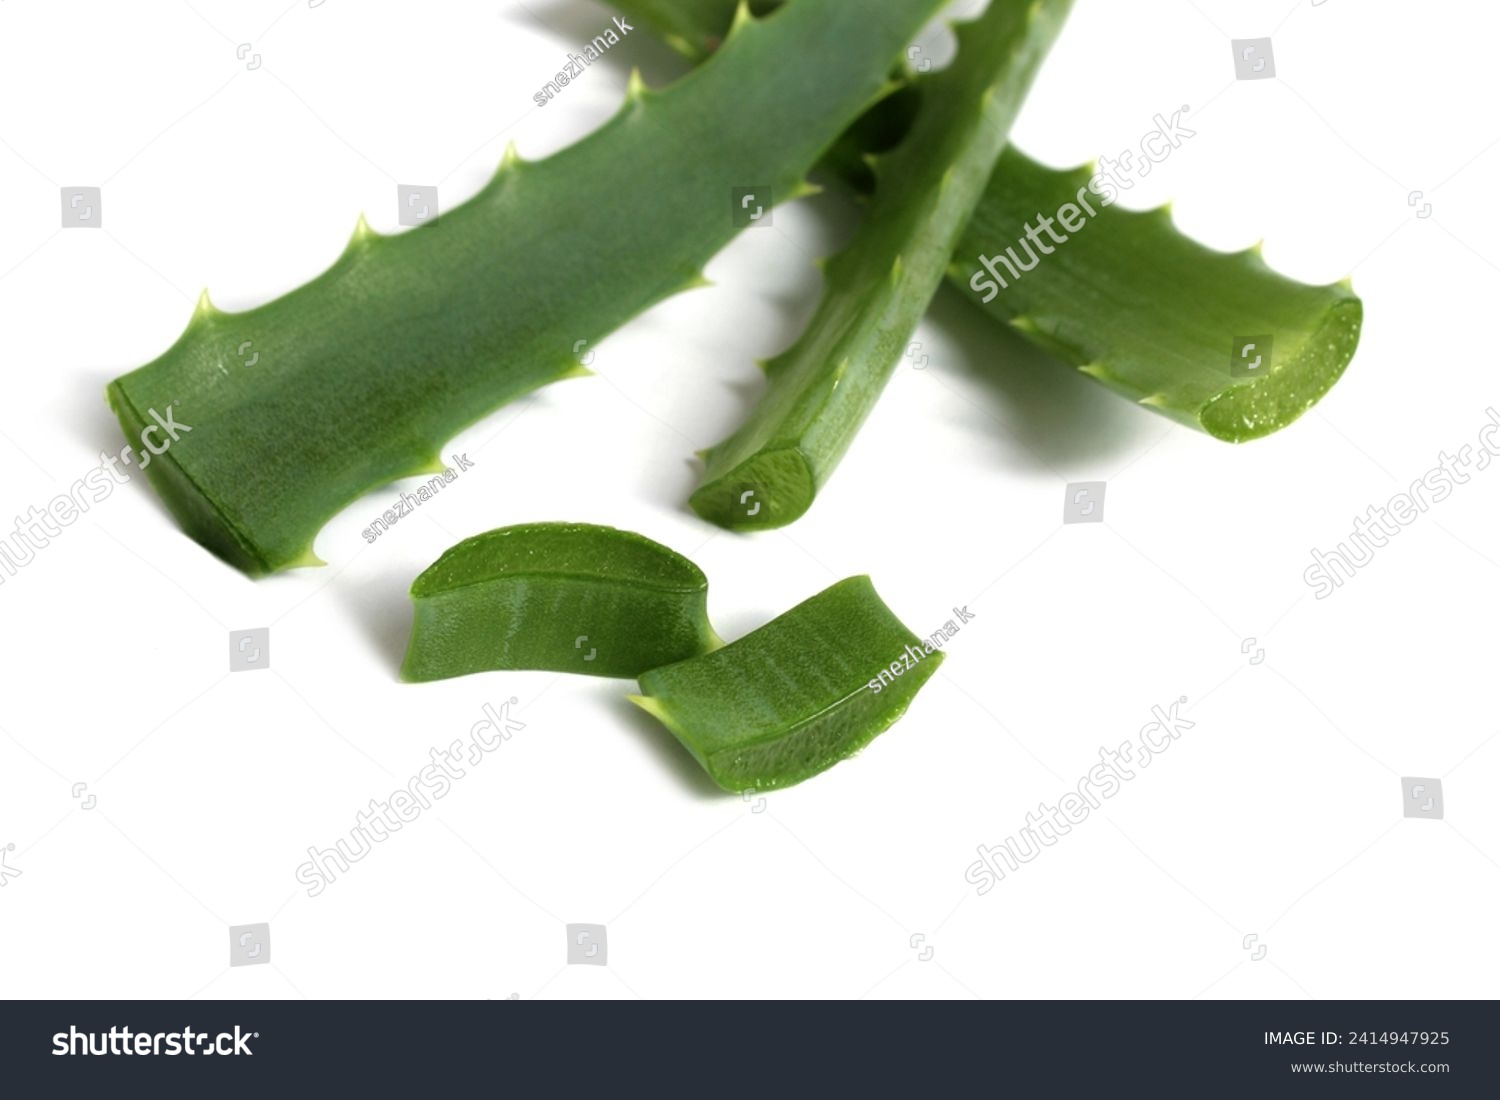 Several pieces of aloe leaves lie on a white background. #2414947925